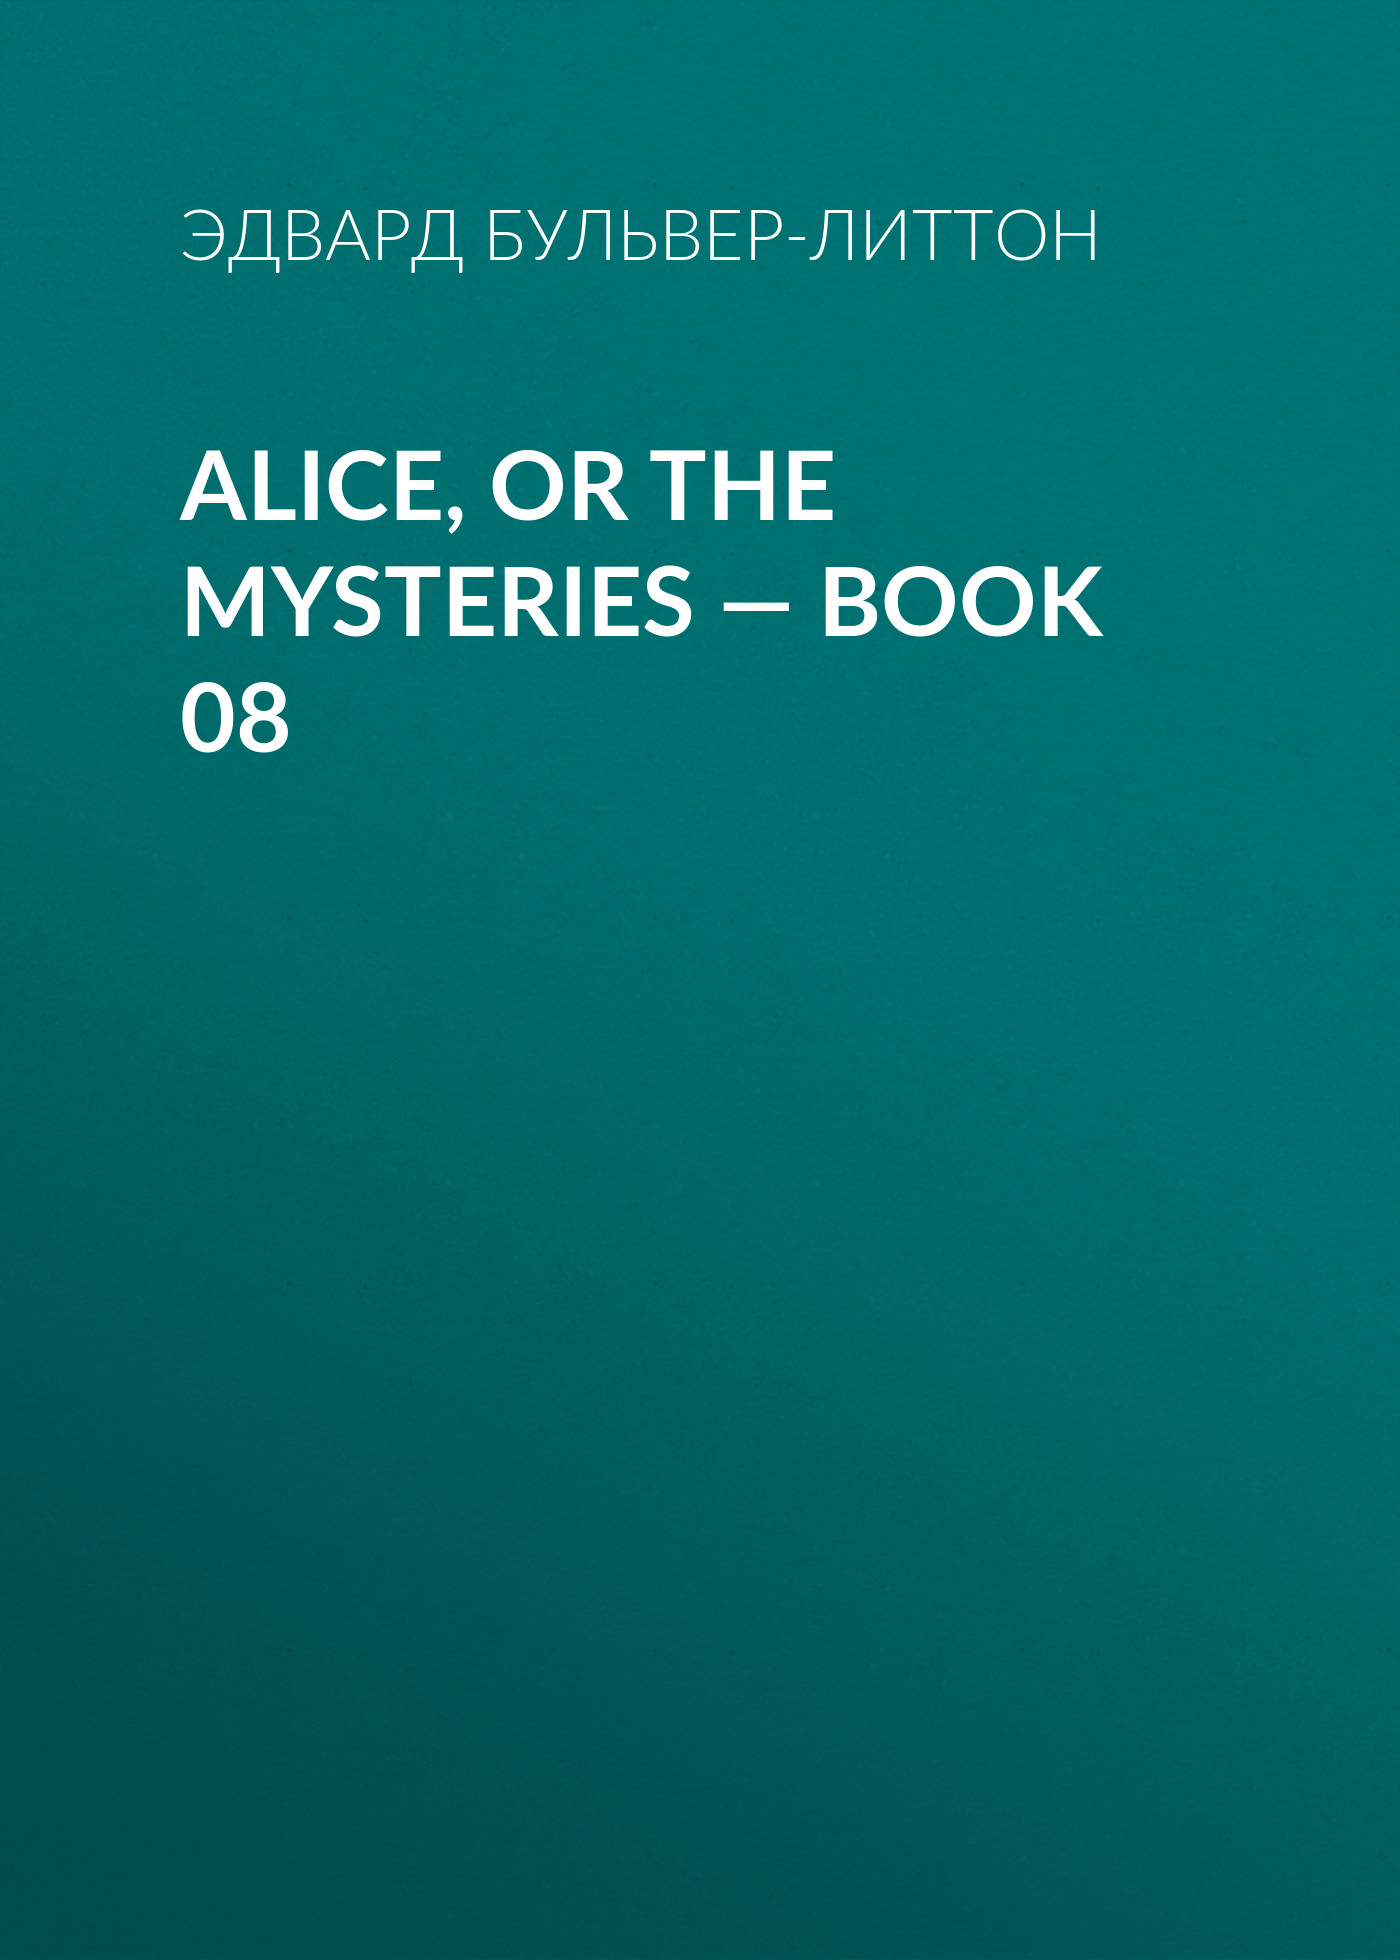 Alice, or the Mysteries— Book 08